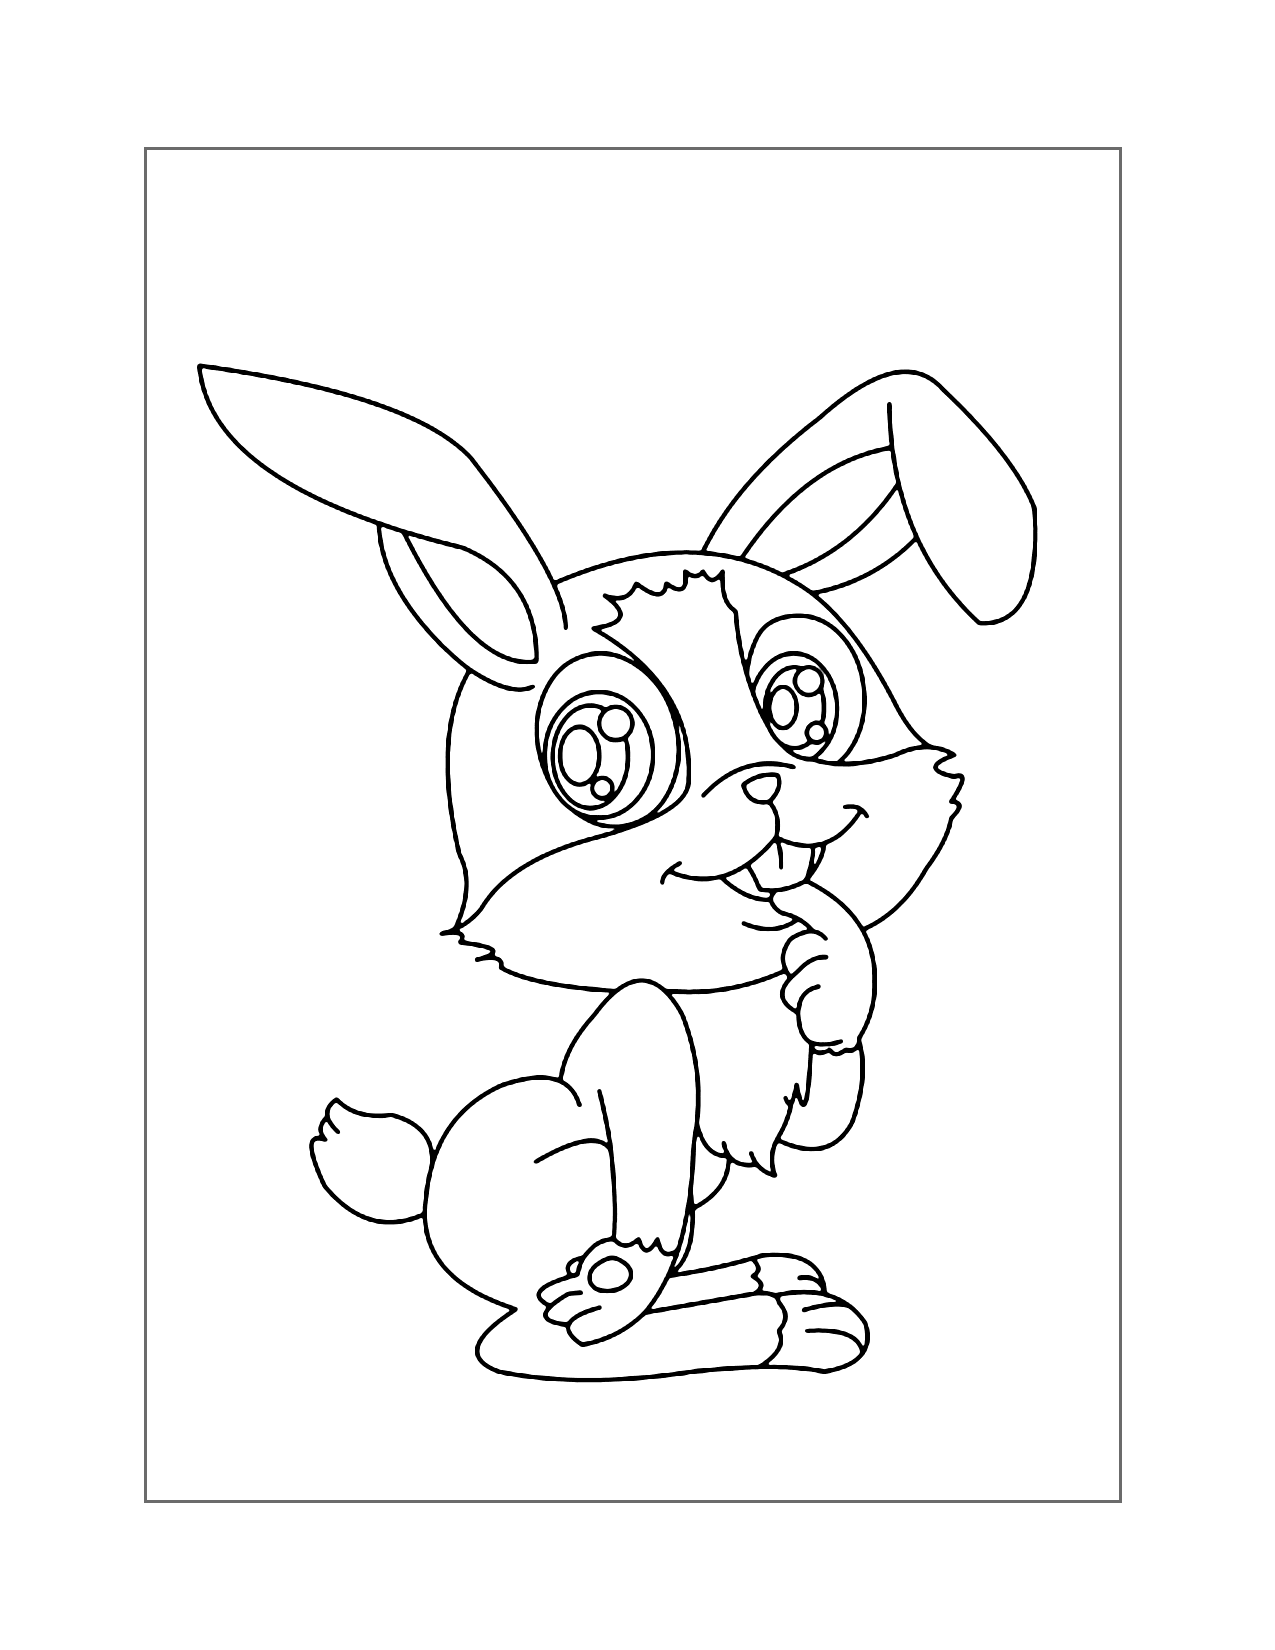 Rabbit With Eye Highlights Coloring Page